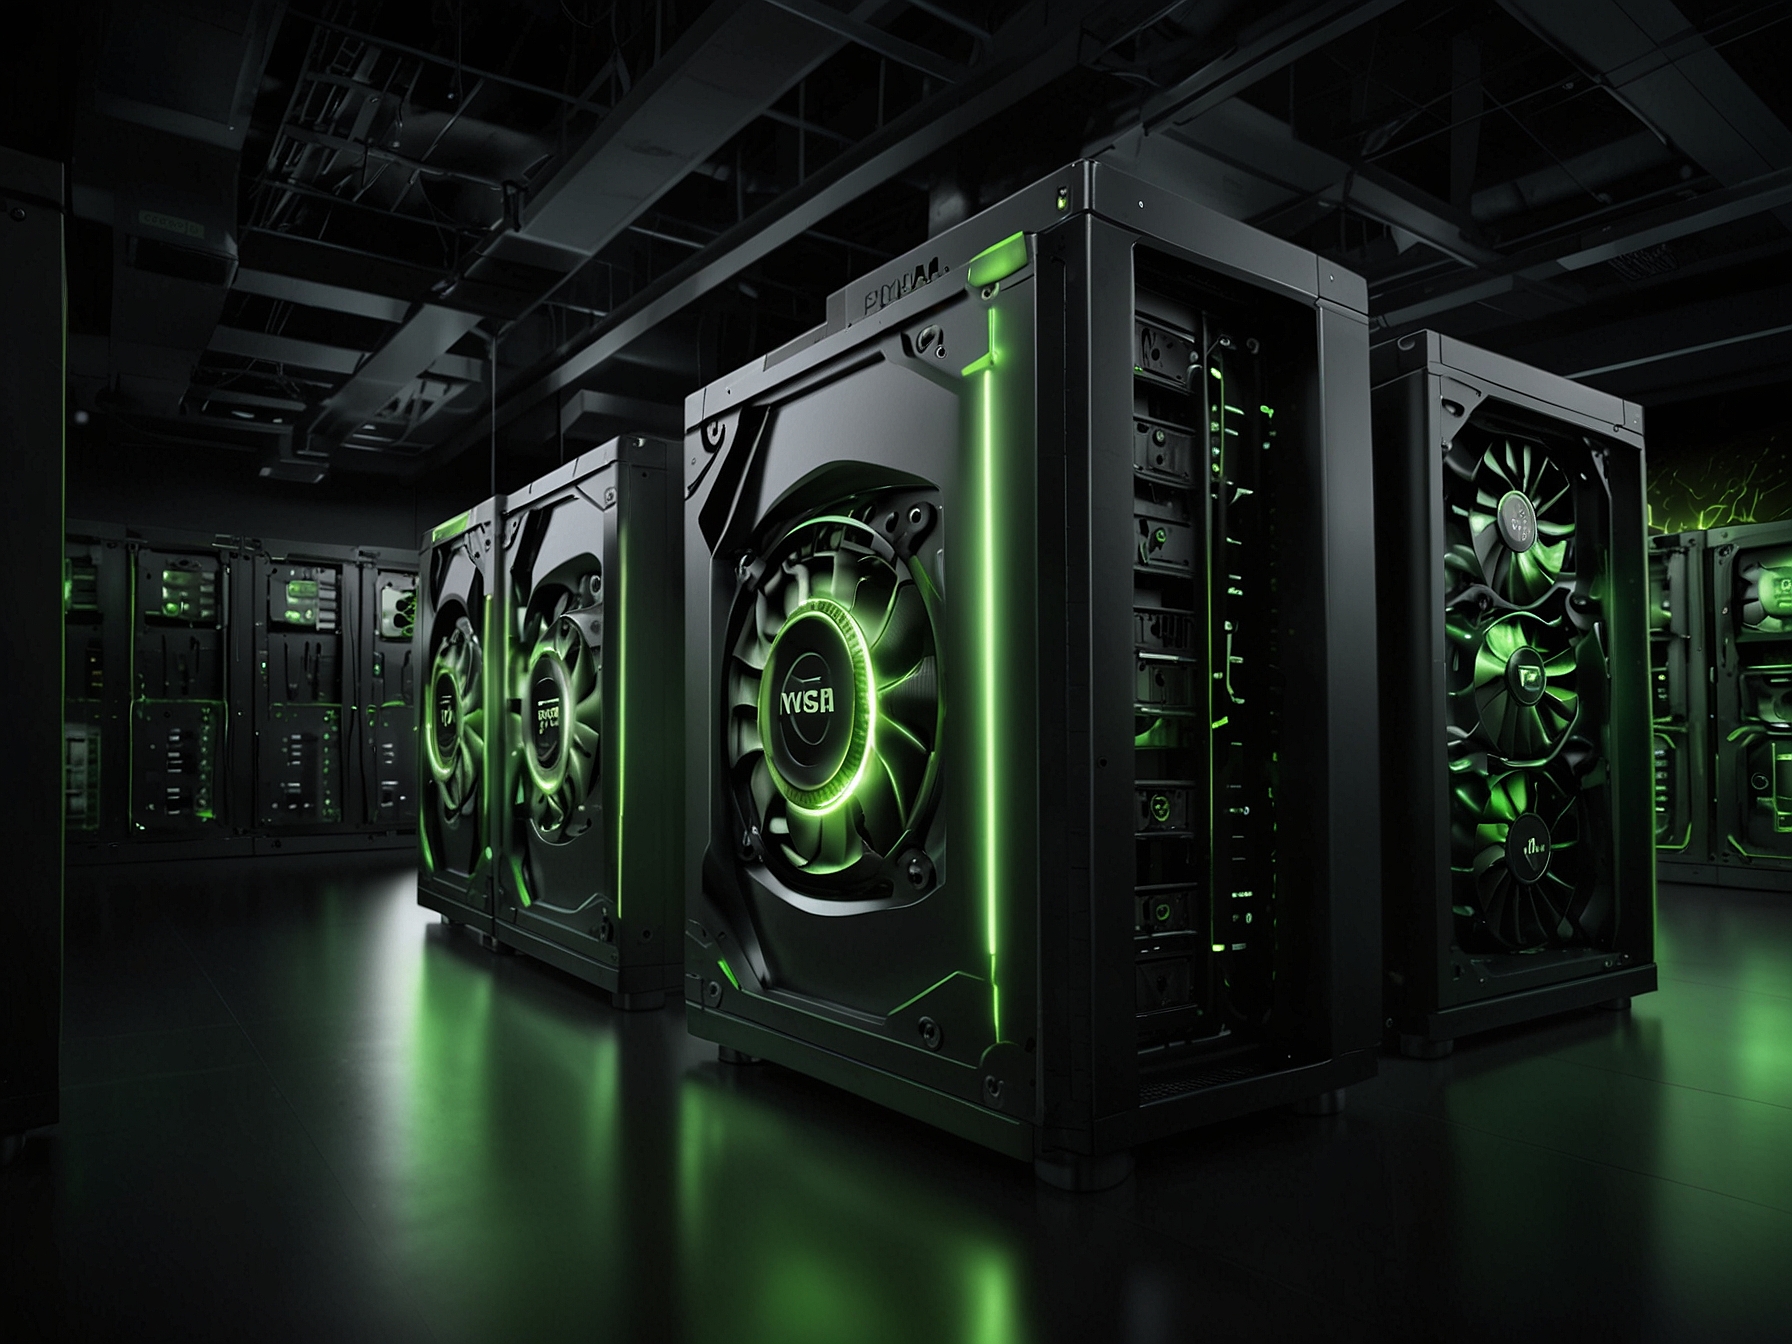 A visual representation of Nvidia's high-performance GPUs powering data centers, illustrating their pivotal role in the ongoing digital transformation.